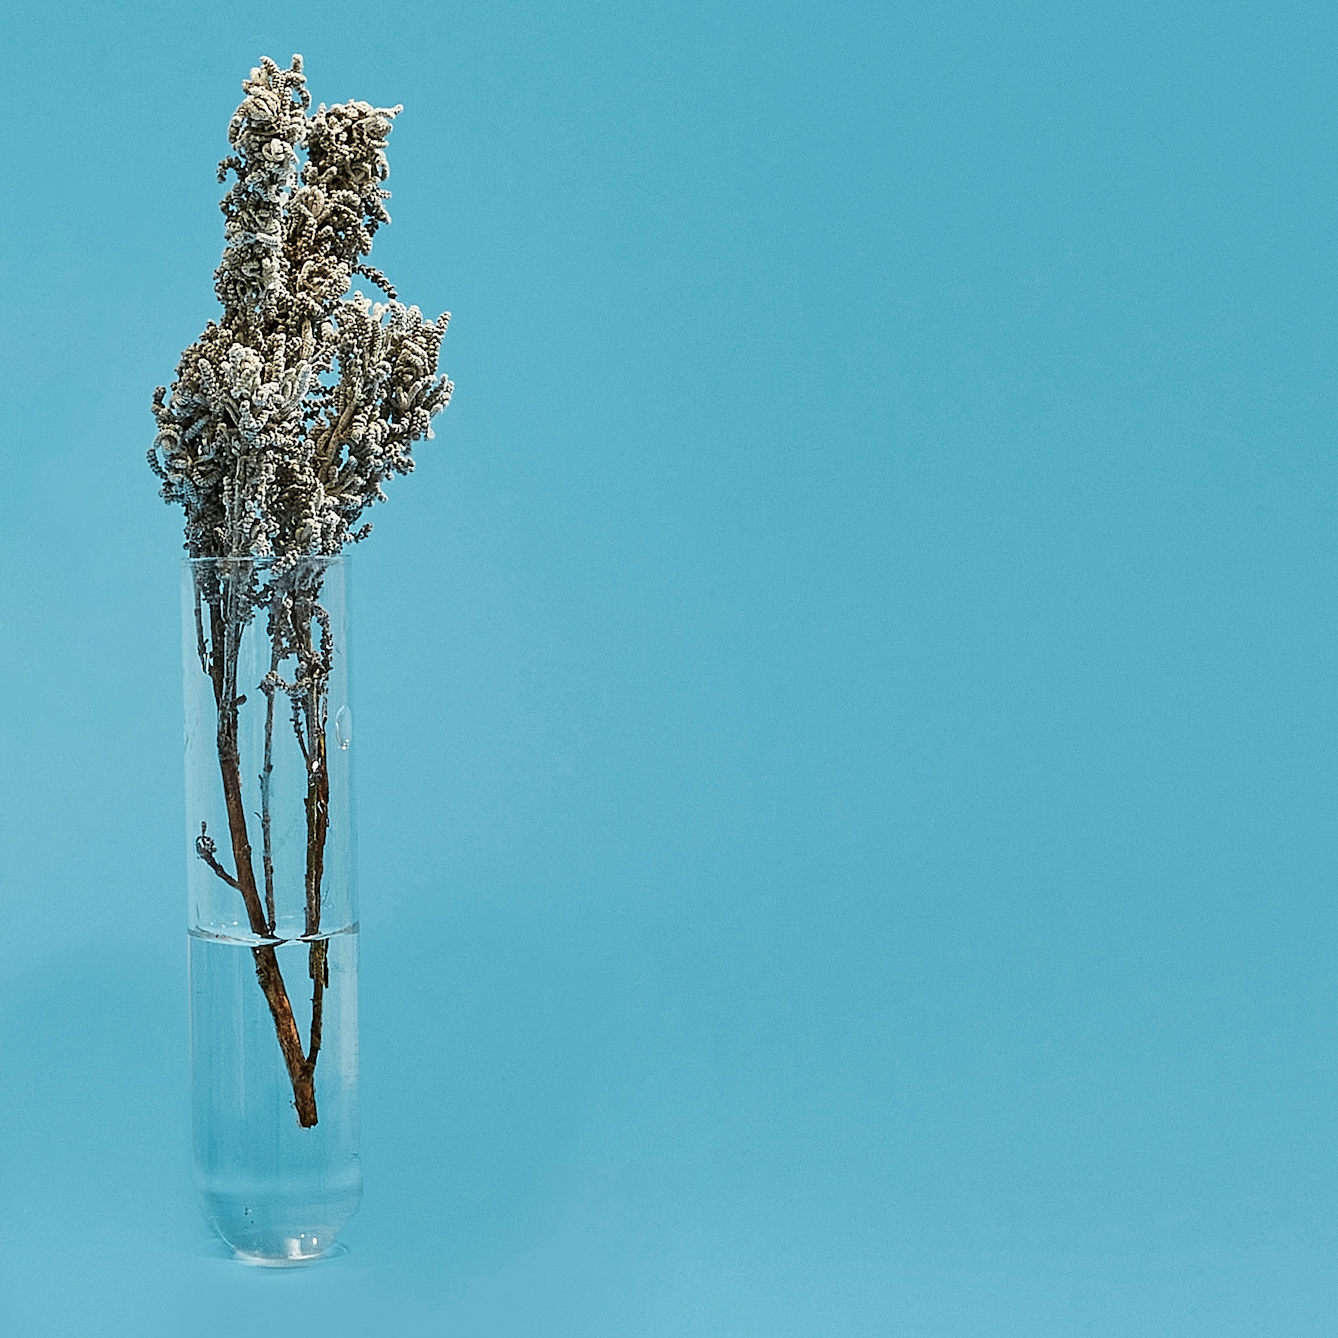 Photograph of a glass test tube on a bright blue background. The test tube has a herb in it, its stem in a small amount of water its leaves and flowers rising out of the top.